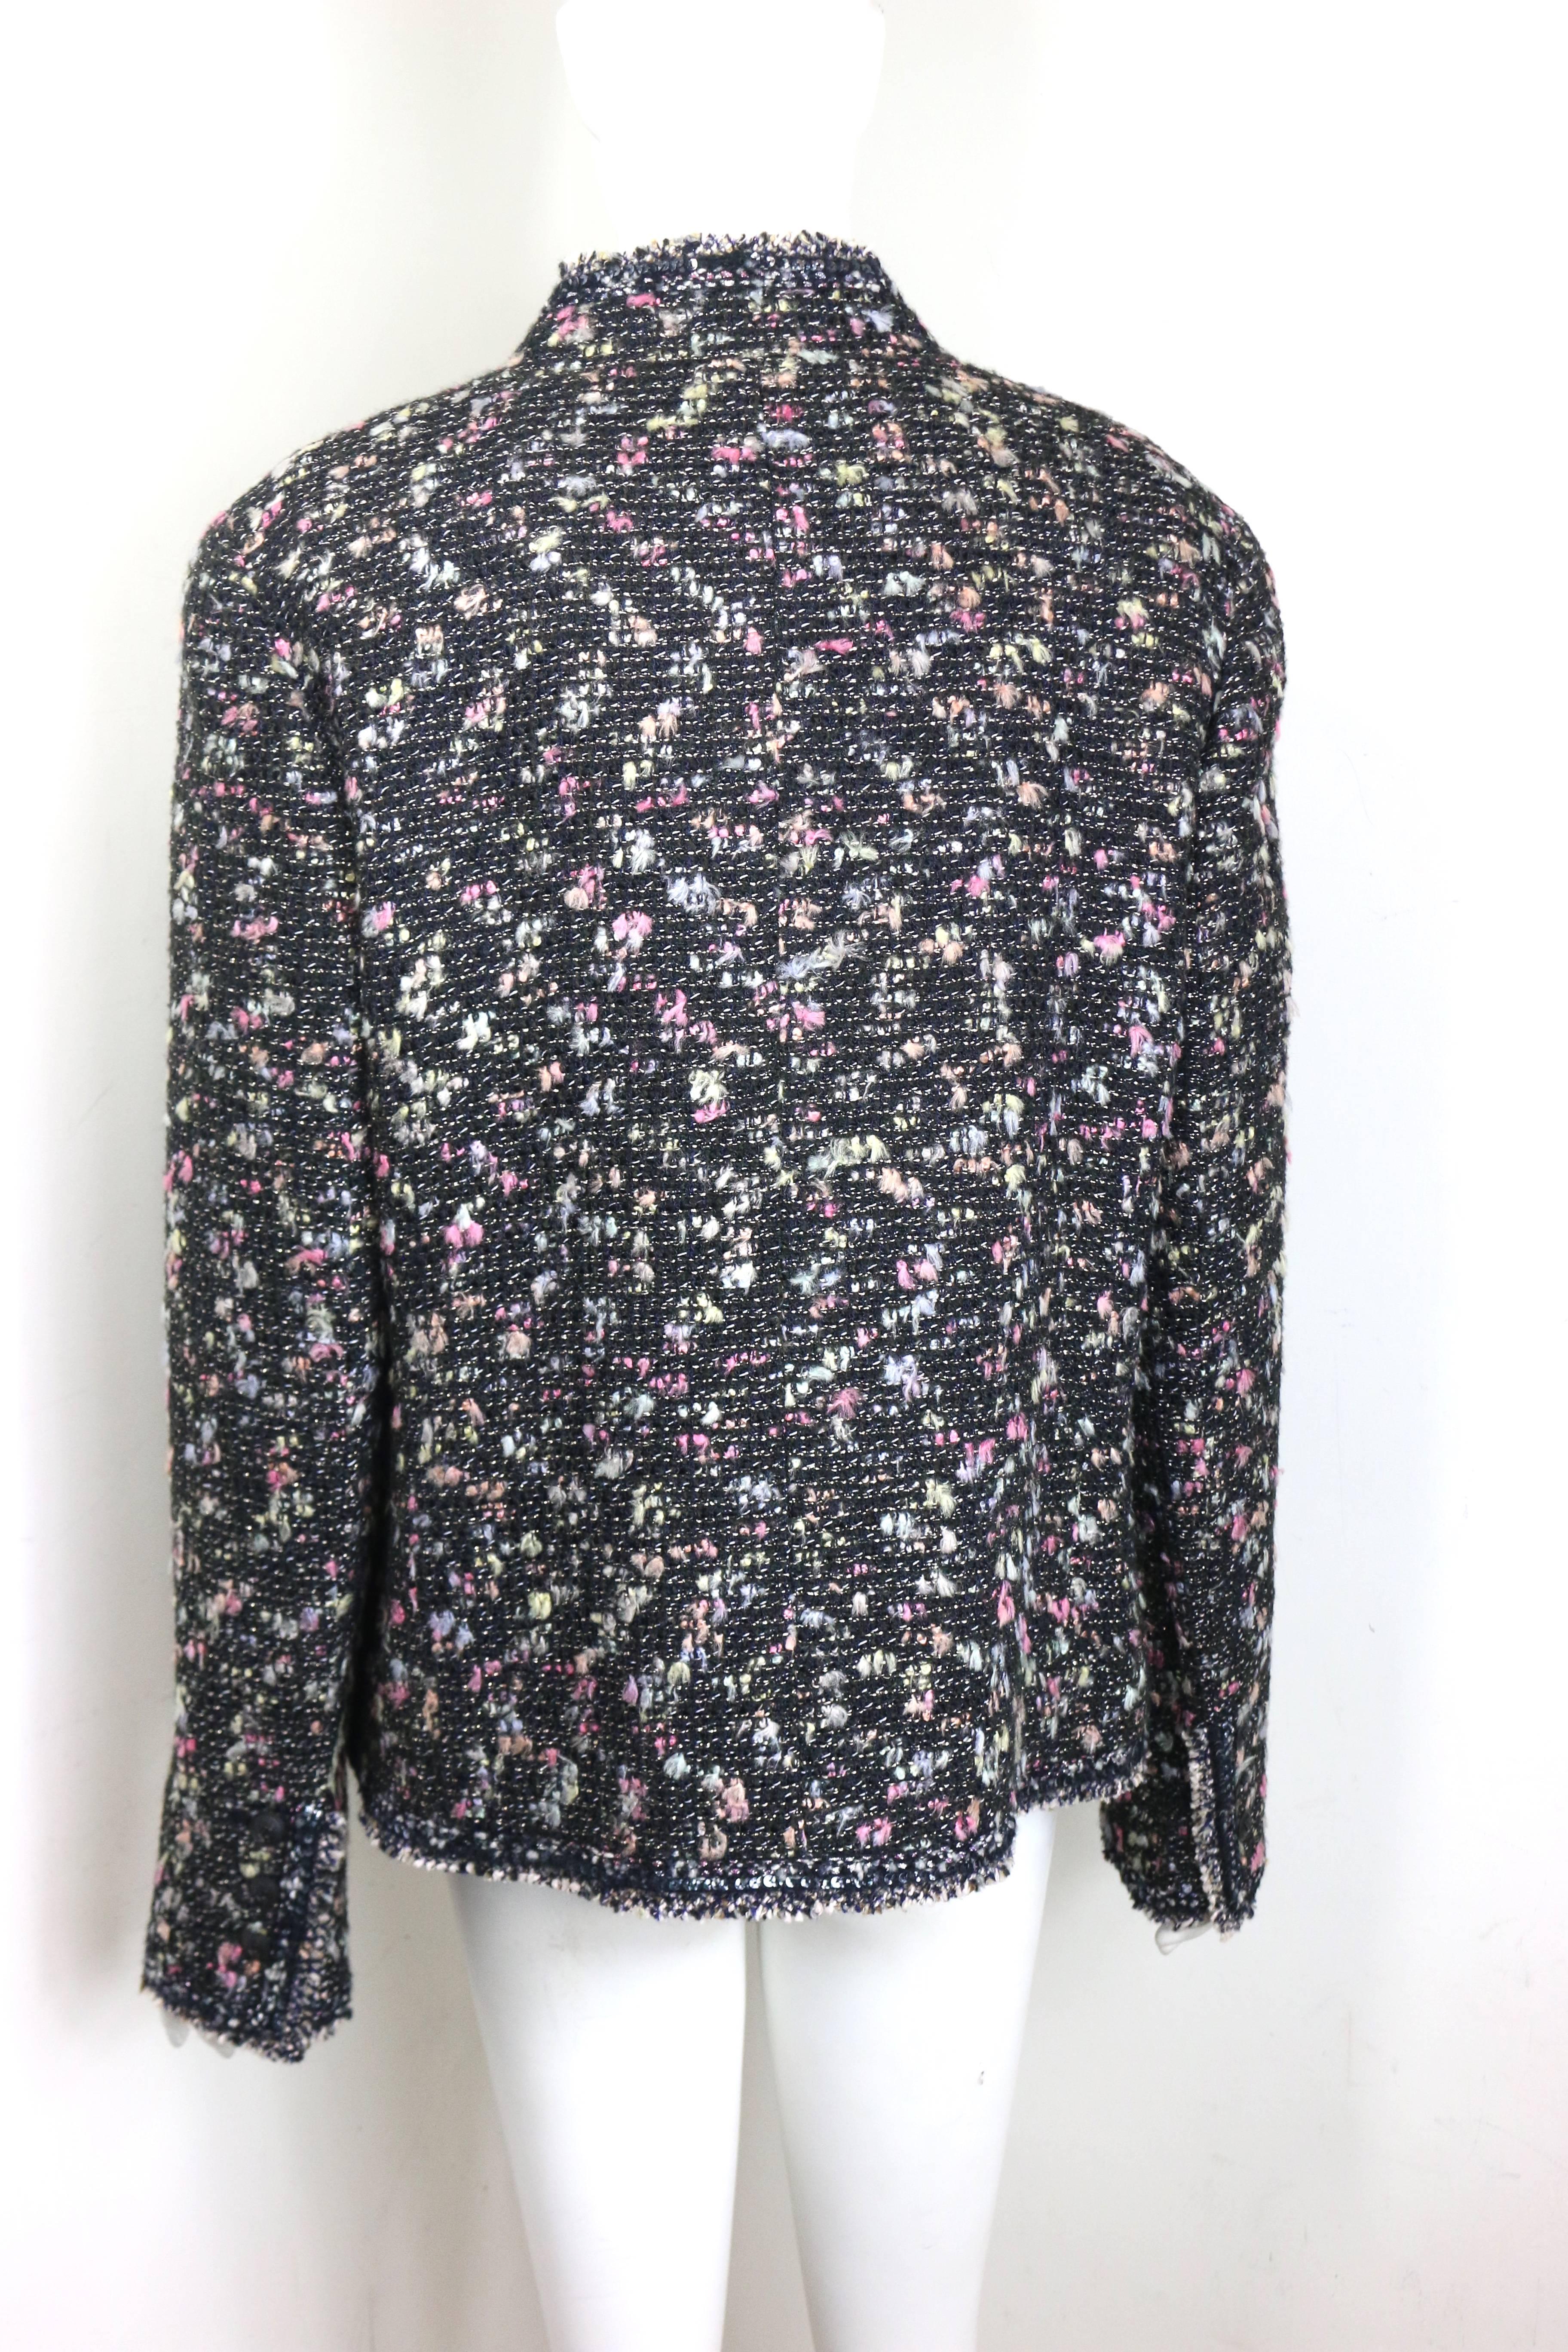 Chanel Black Multi Colours Tweed Jacket and Sleeveless Top Ensembles For Sale 3